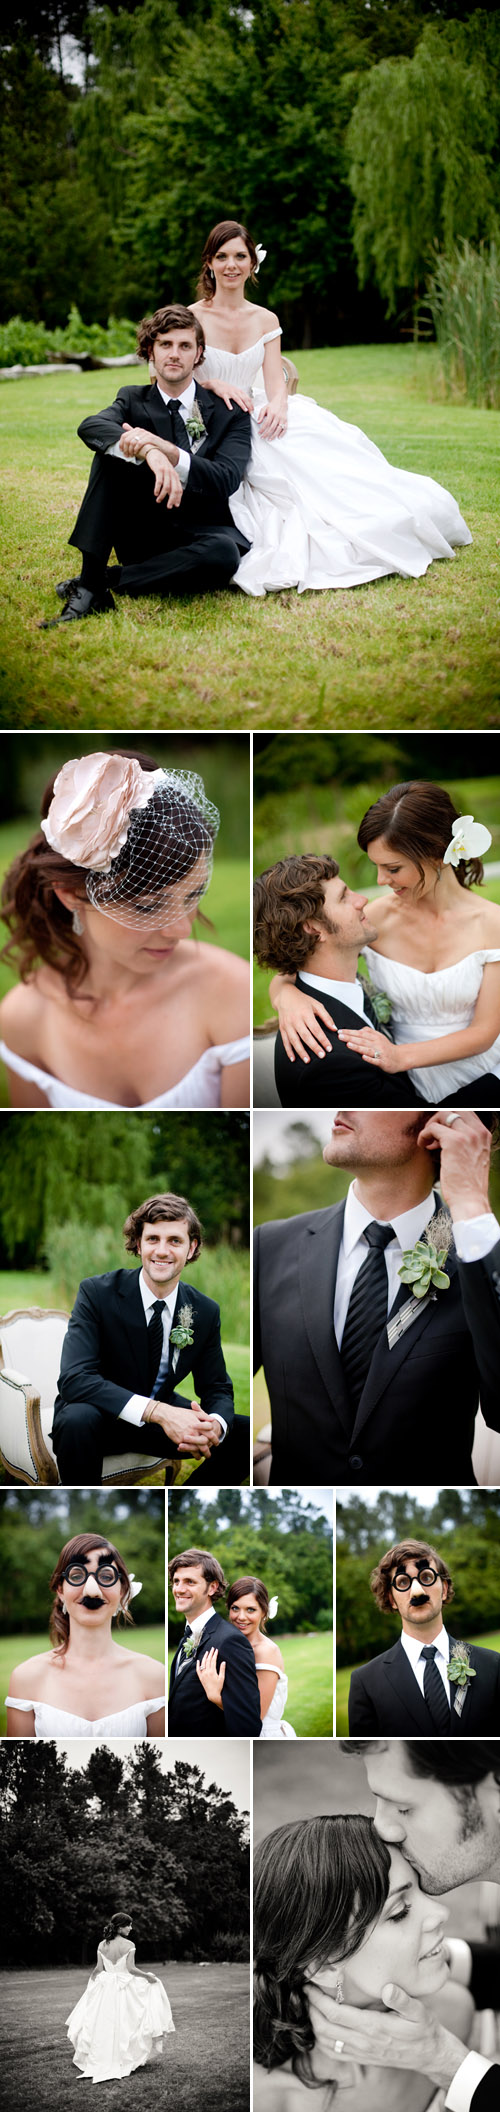 vintage style real wedding in south africa, romantic wedding couple portraits, images by Christine Meintjes